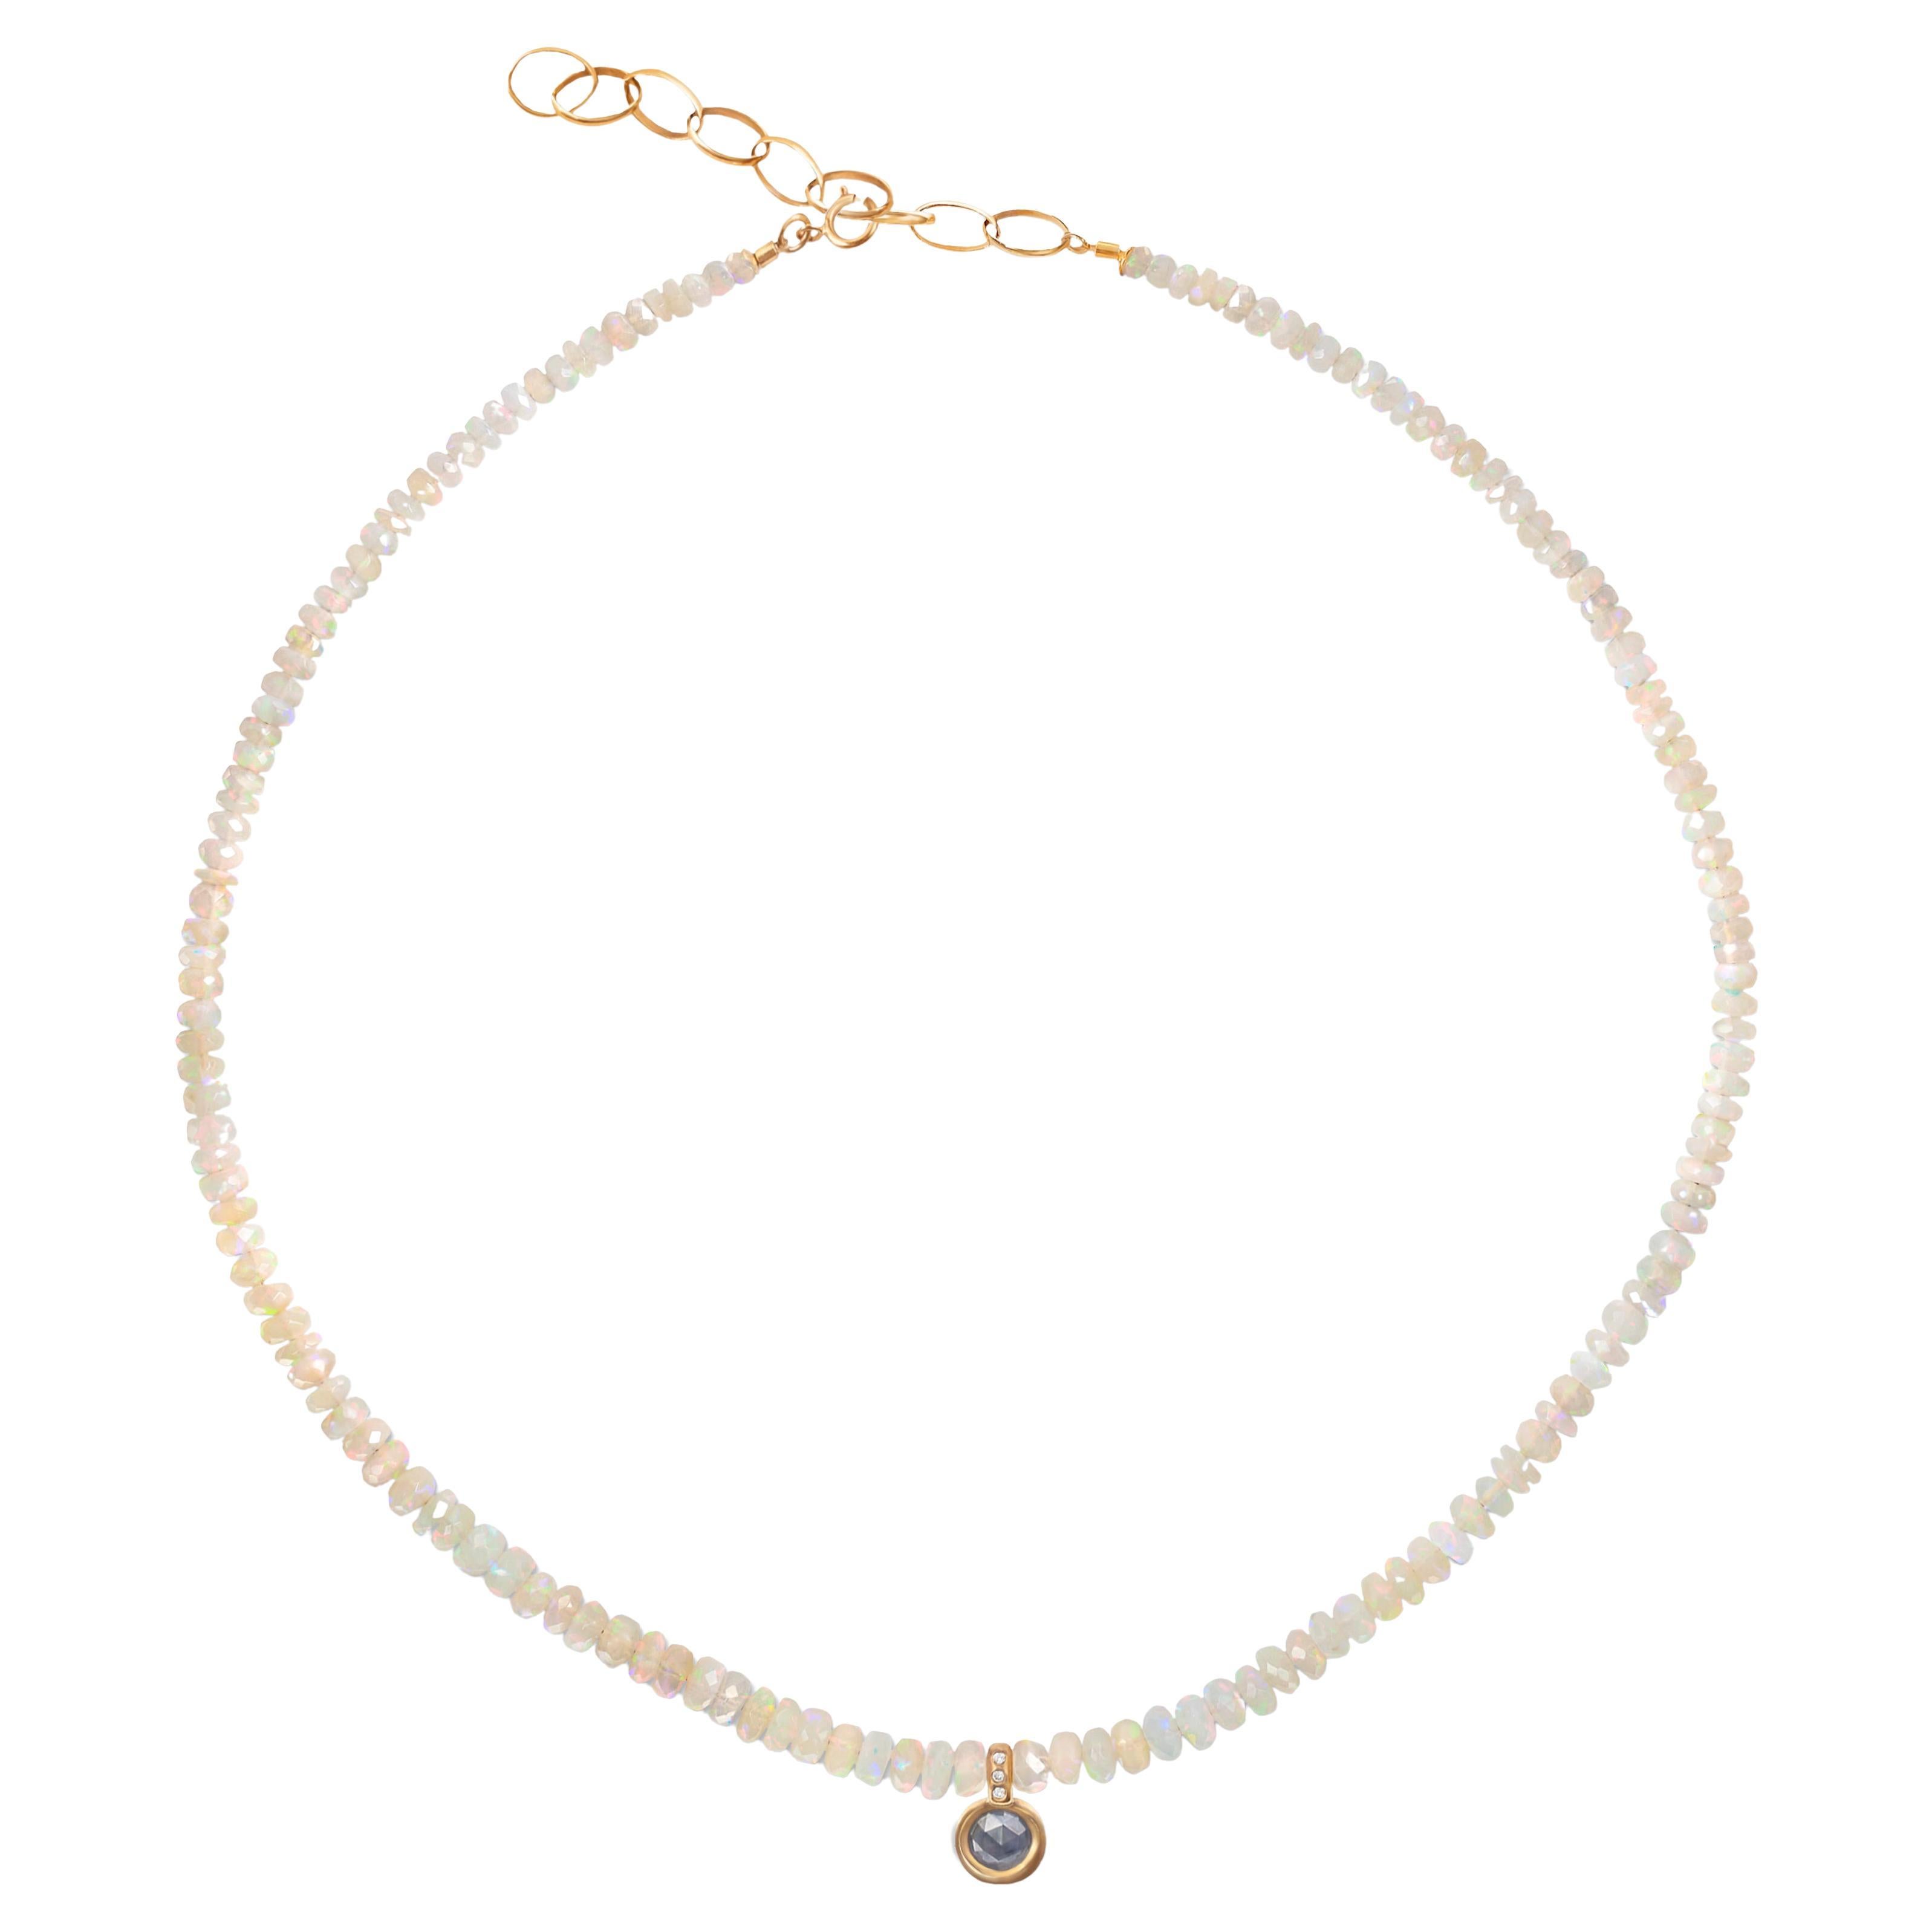 This handmade necklace is strung with graduated rustic-cut faceted Ethiopian opals finished with a central 18k gold and diamond pendant.  Cast in 18-karat gold, the pendant features a checkerboard-cut opaque grey rosecut diamond and three white